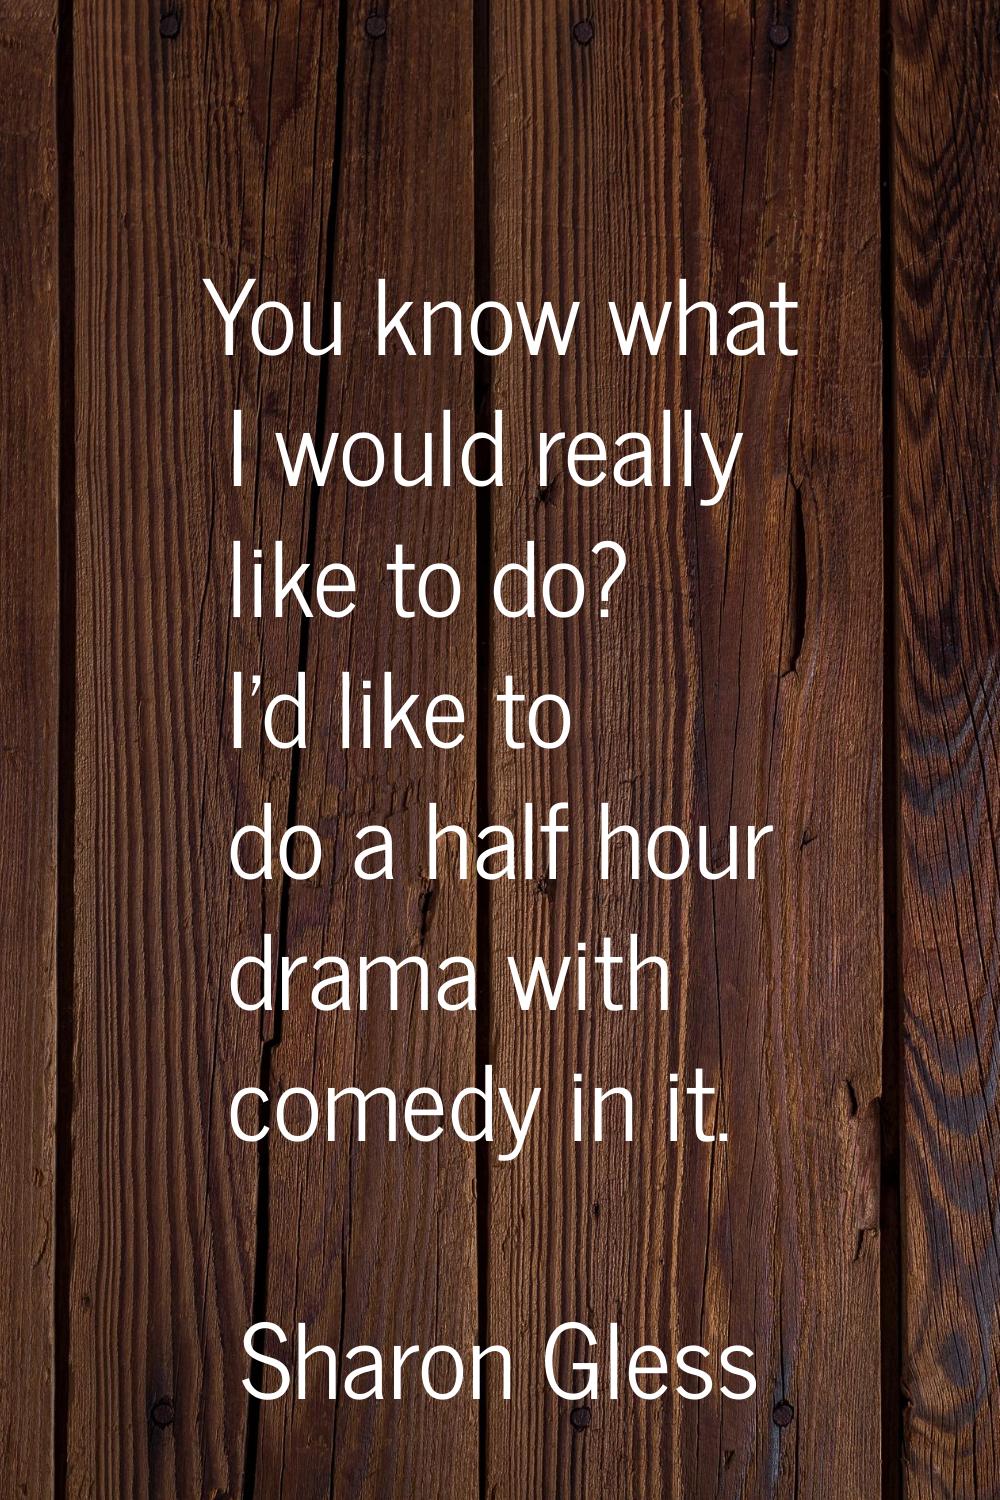 You know what I would really like to do? I'd like to do a half hour drama with comedy in it.